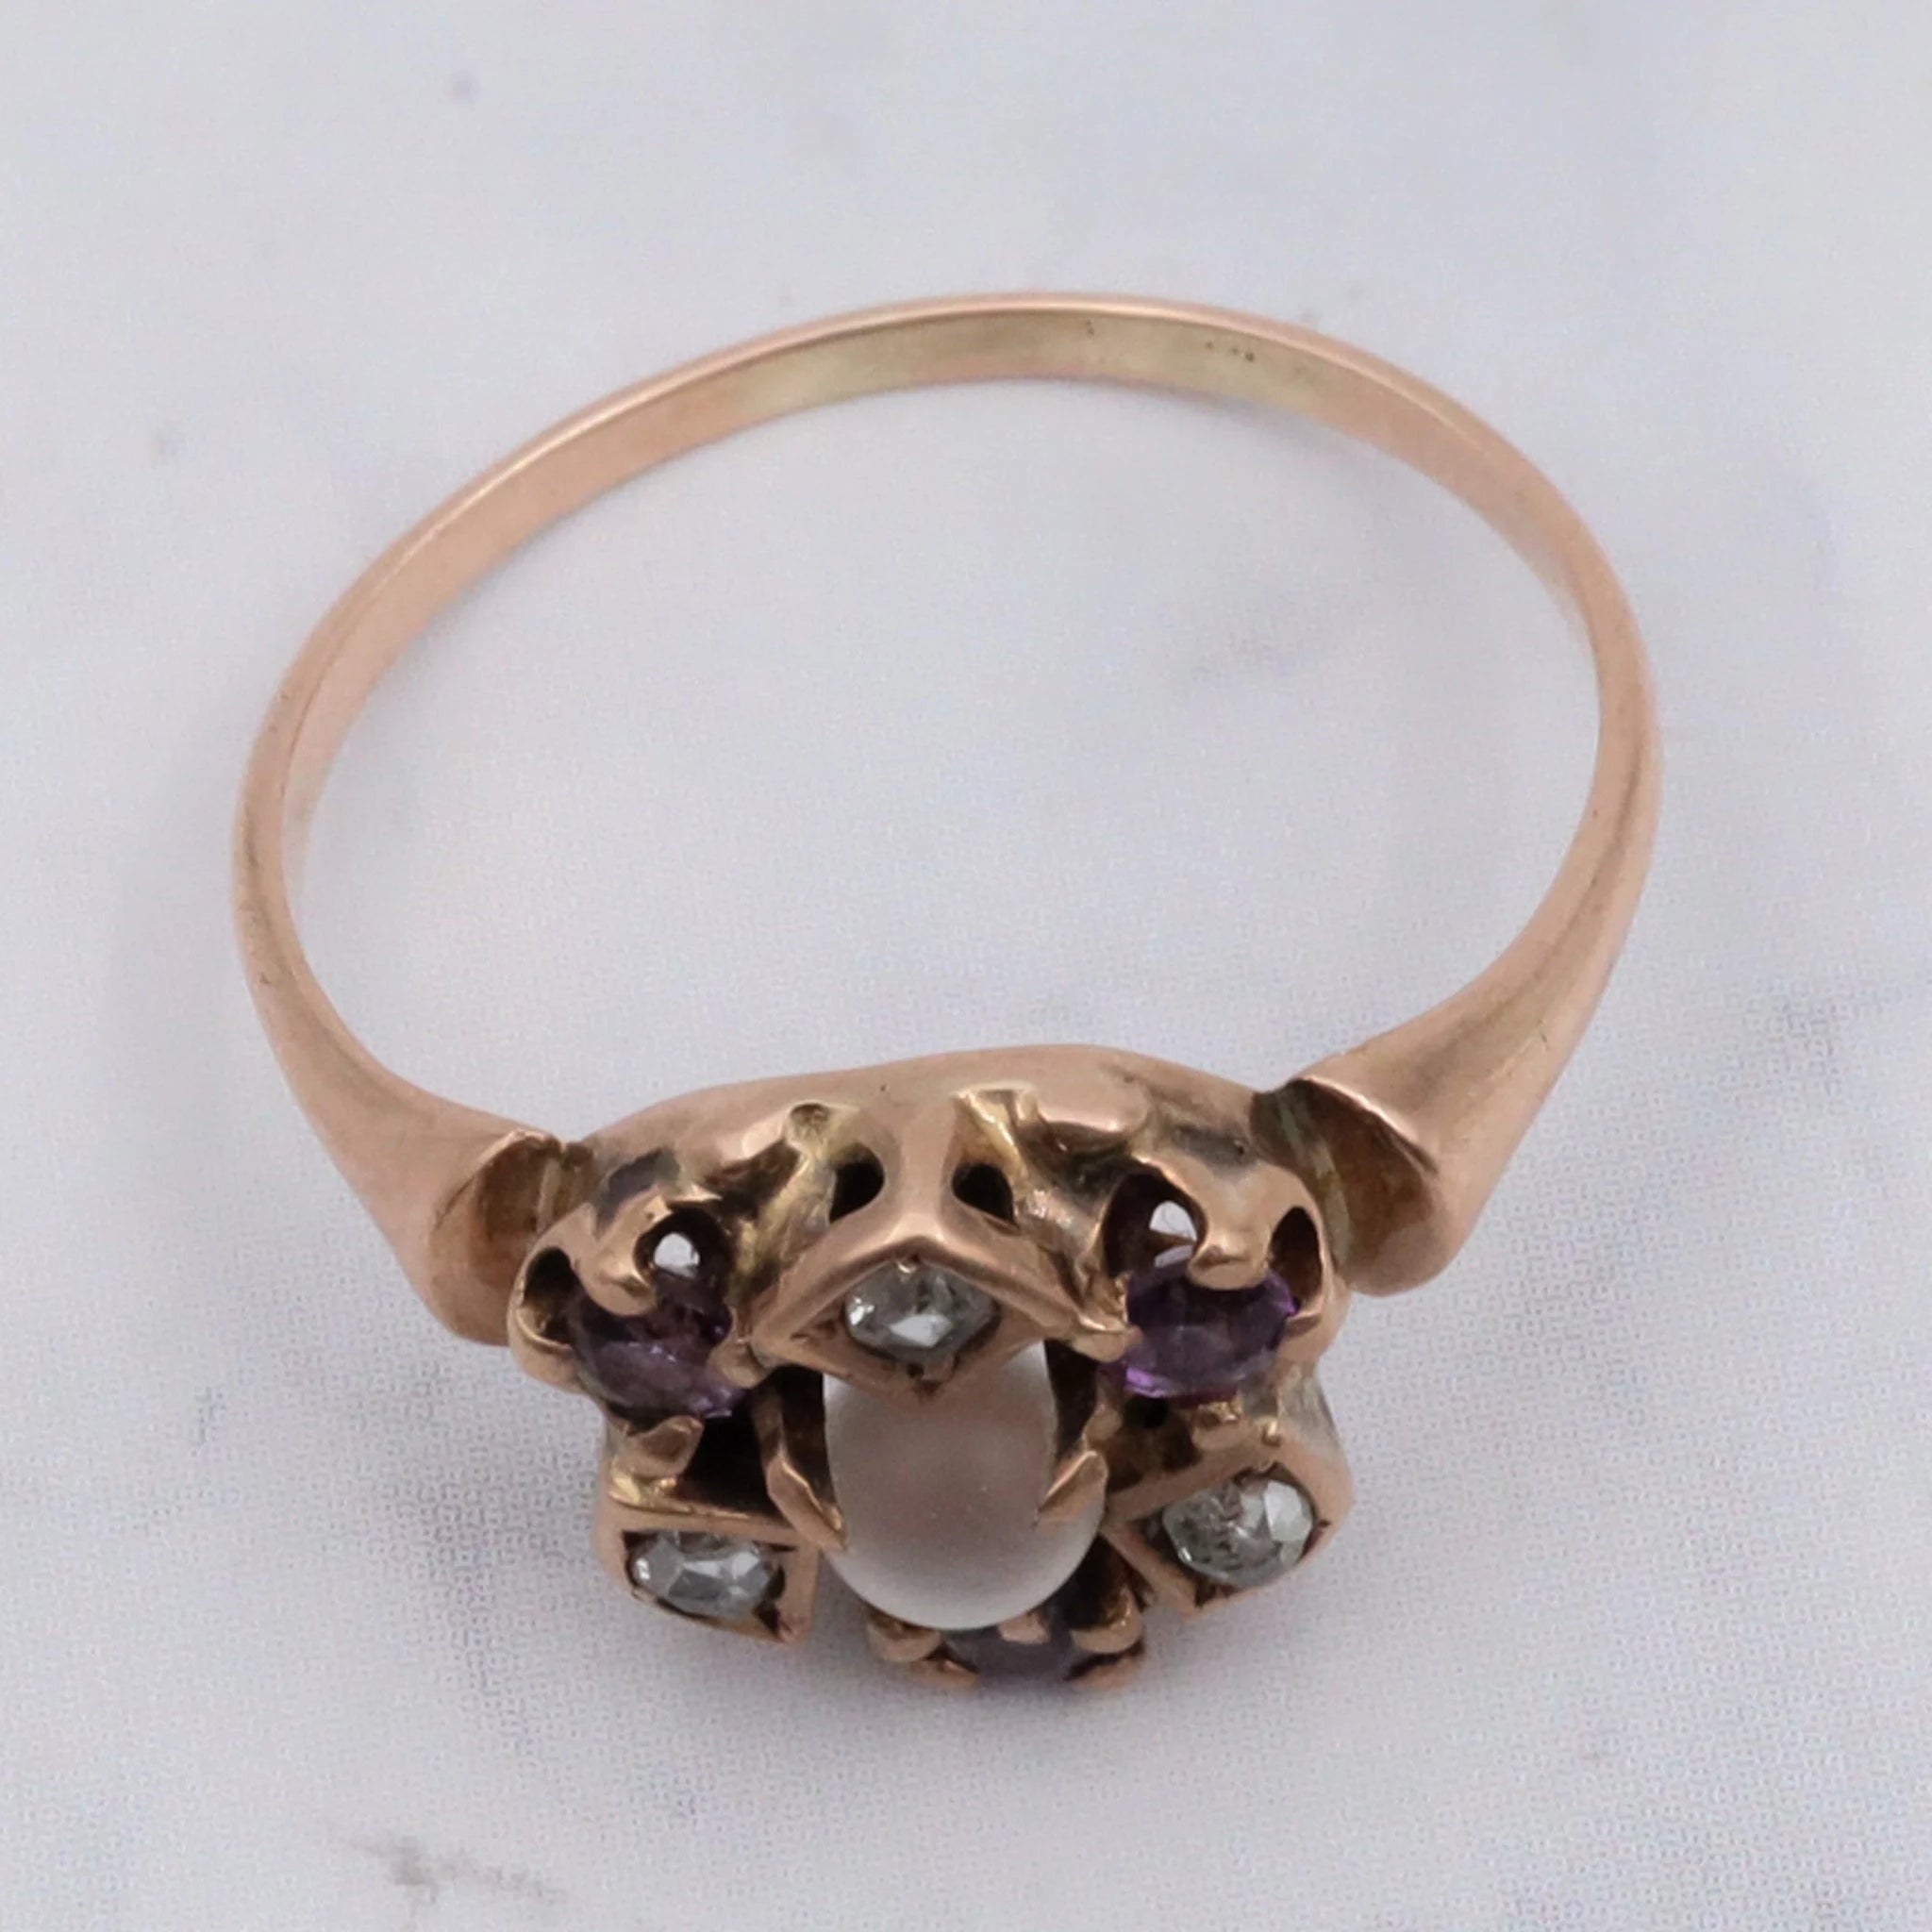 Antique Victorian 10K Gold Ring with Moonstone Orb, Rose Cut Diamond, & Amethyst Accents - Size 4